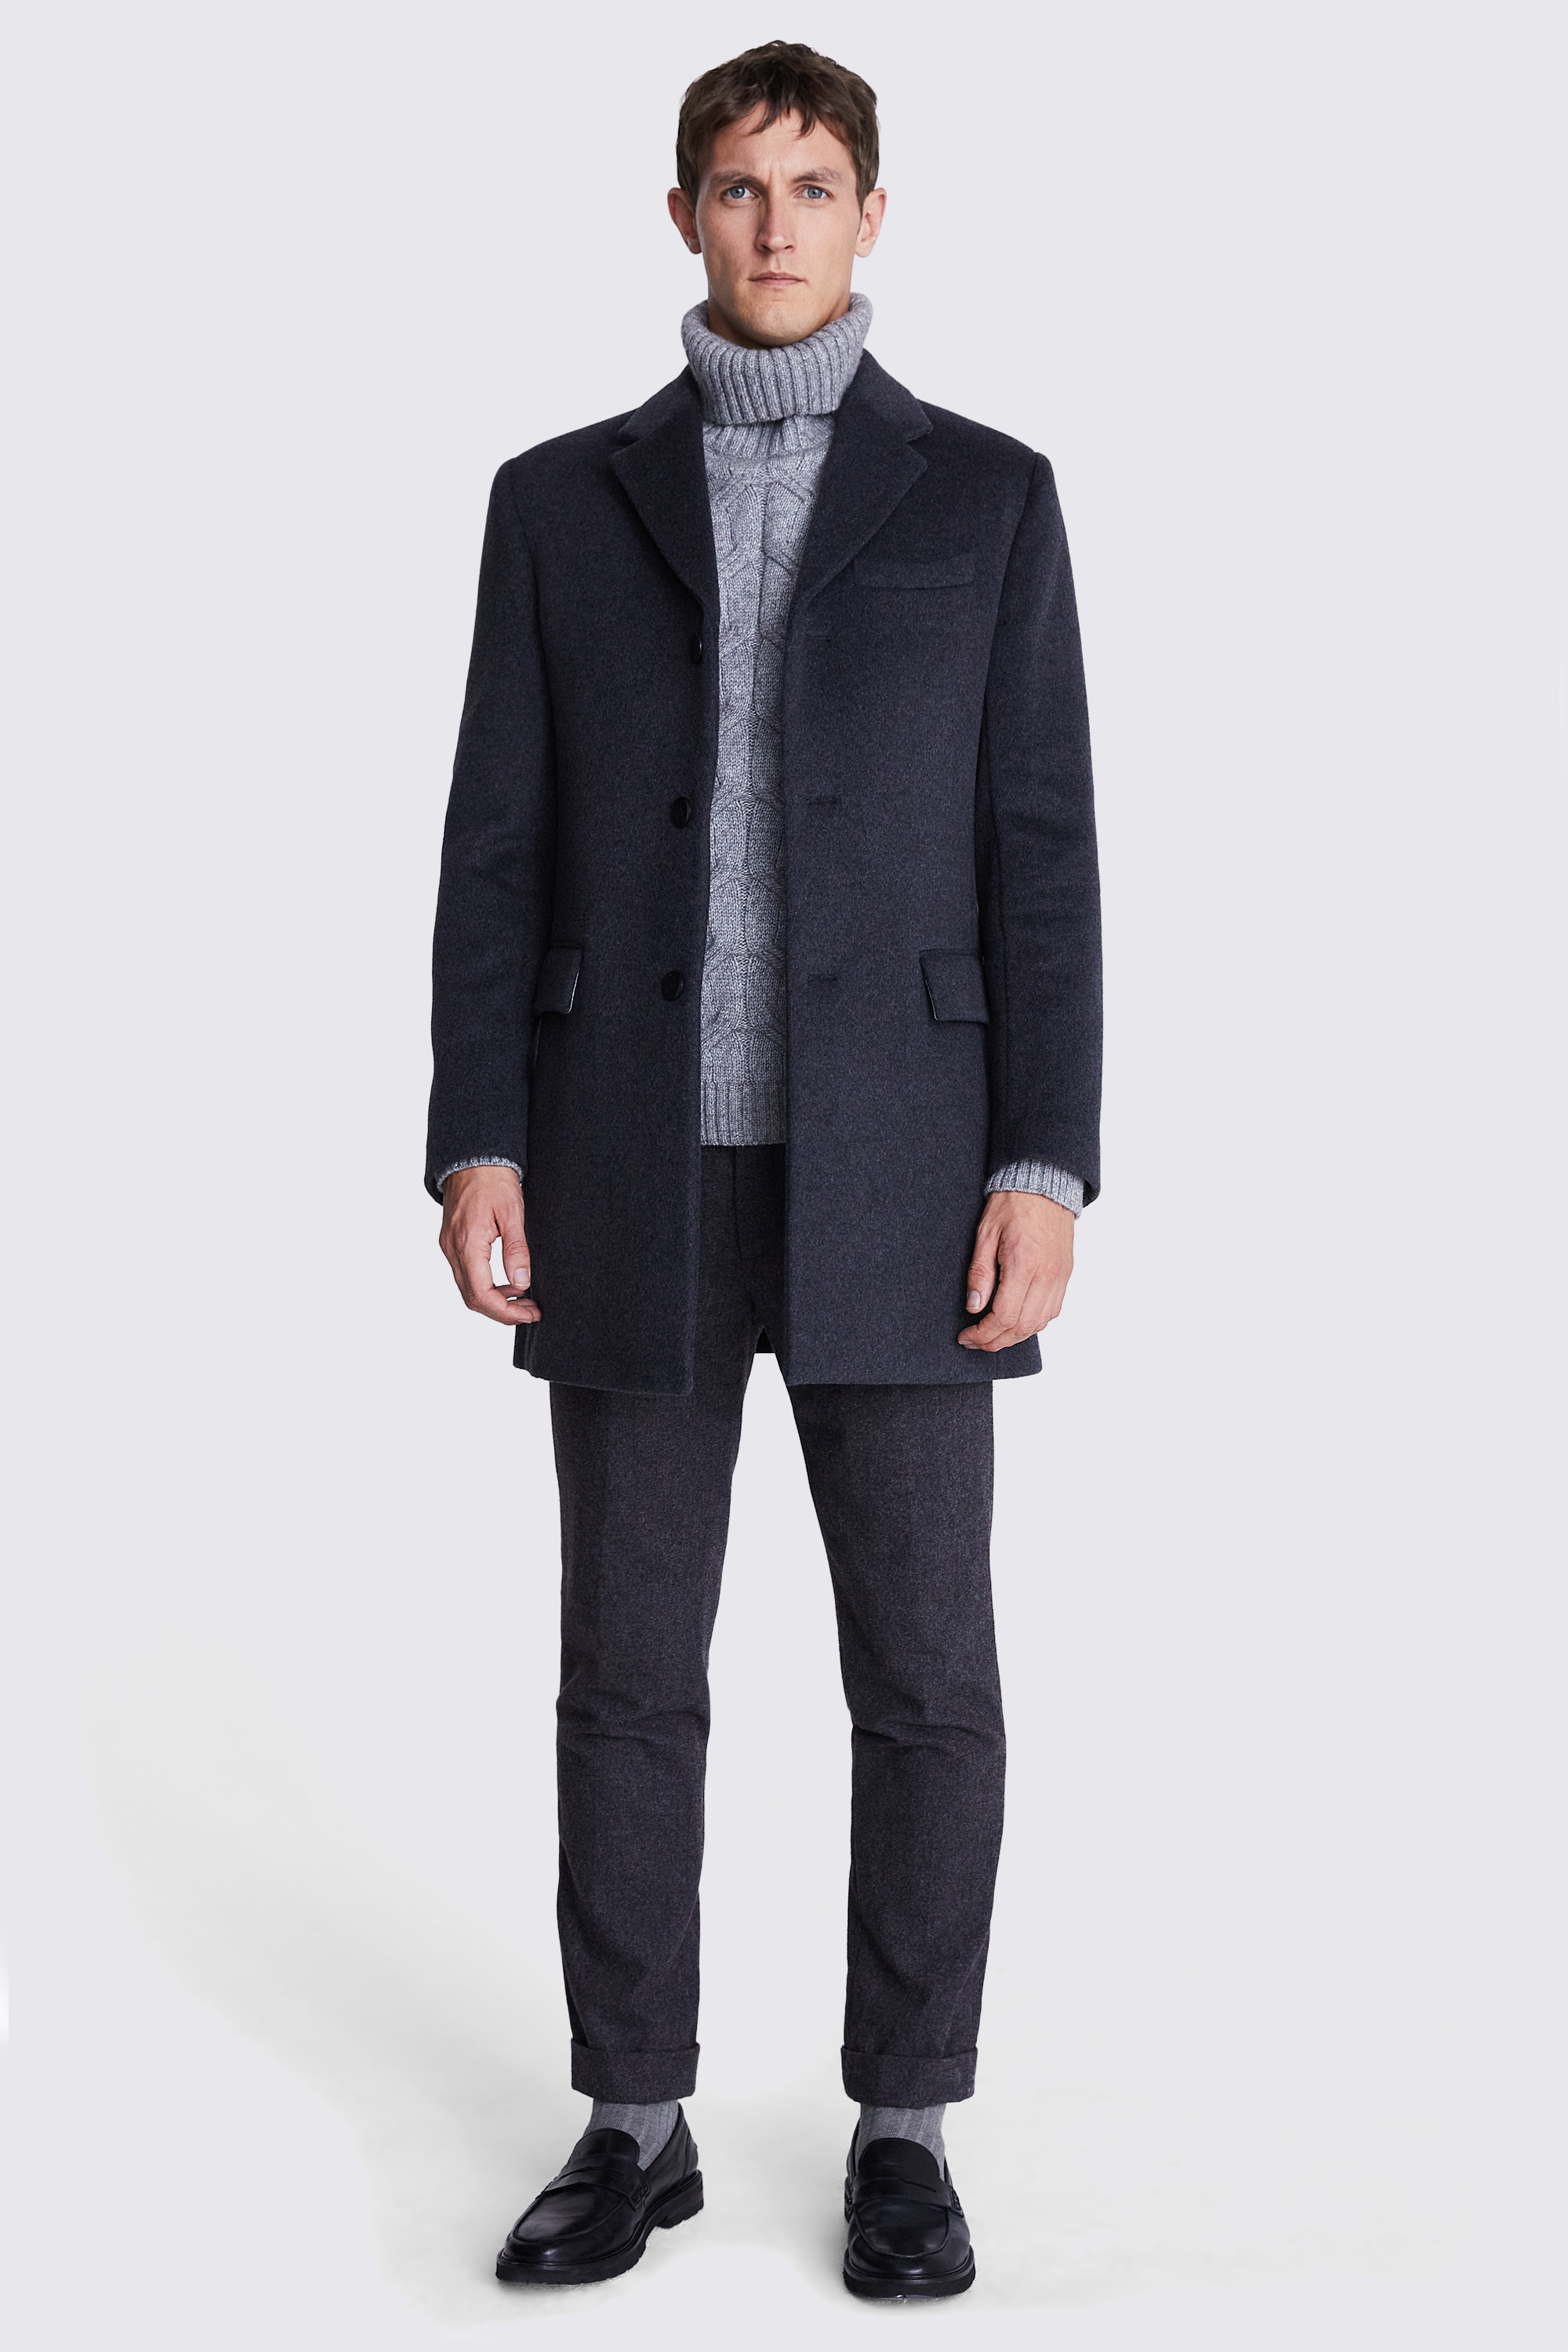 Charcoal Wool Cashmere Blend Overcoat | Buy Online at Moss